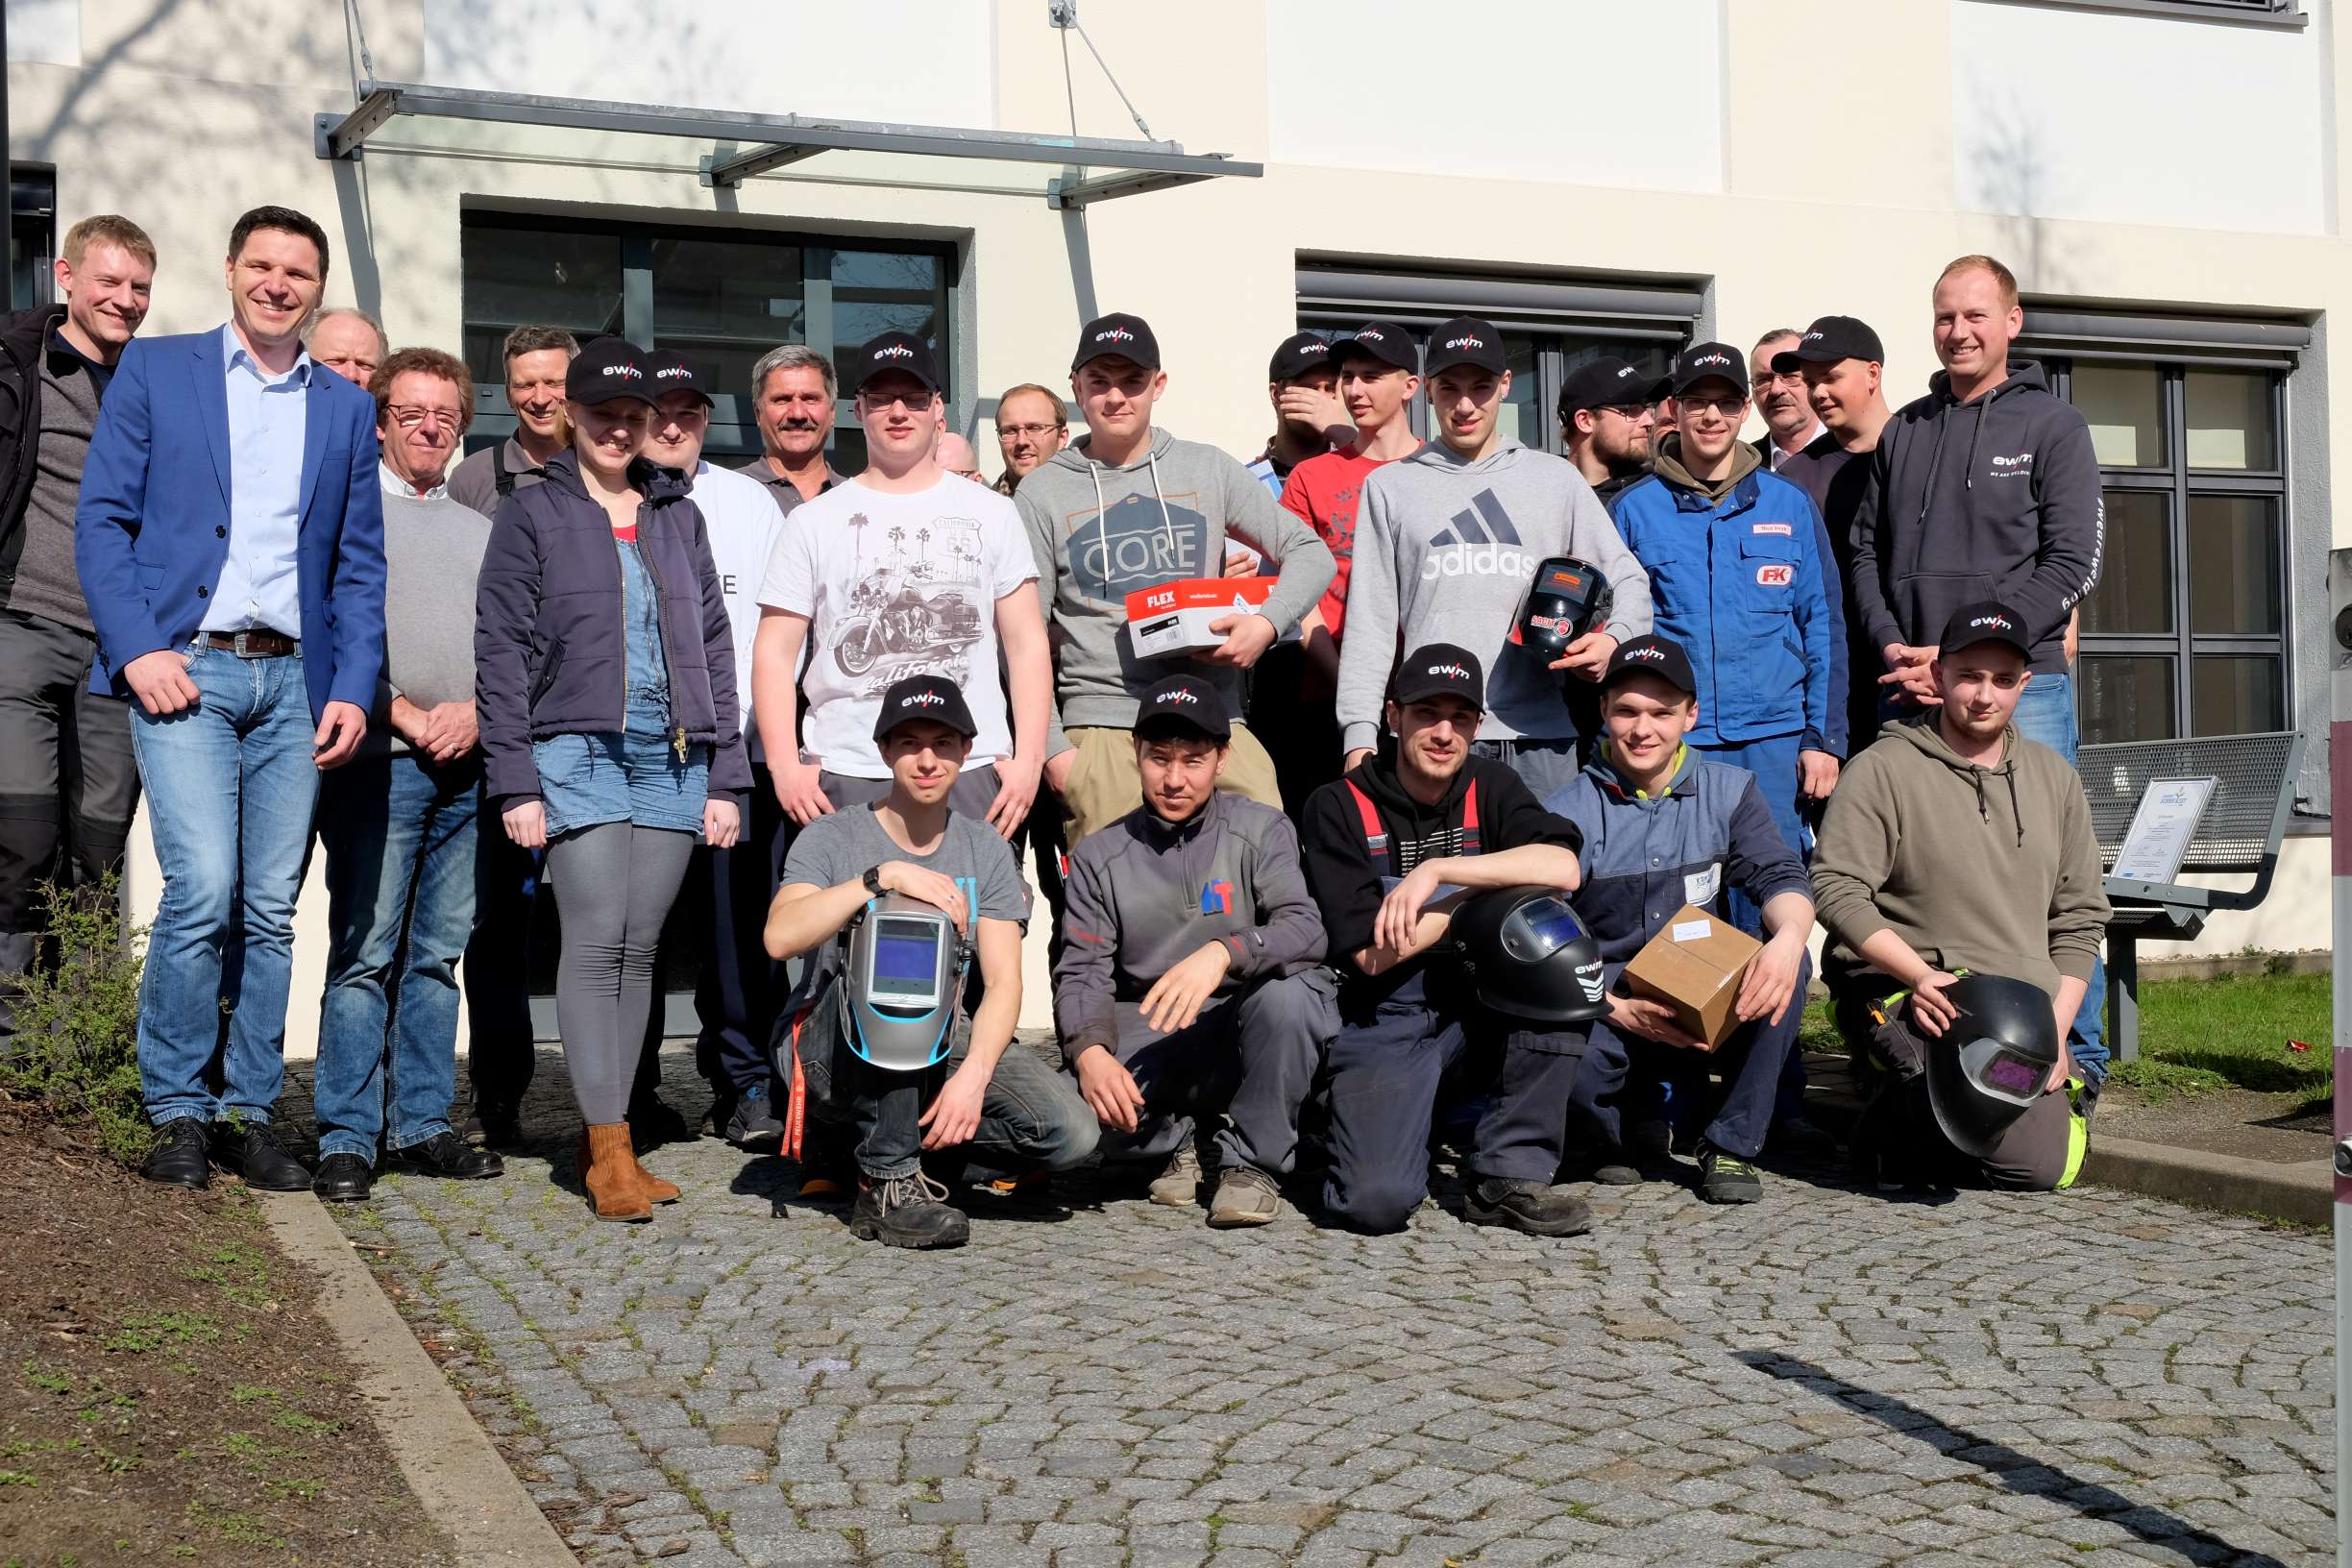 EWM AG to sponsor DVS Jugend Schweißt (Young Welder of the Year) competition